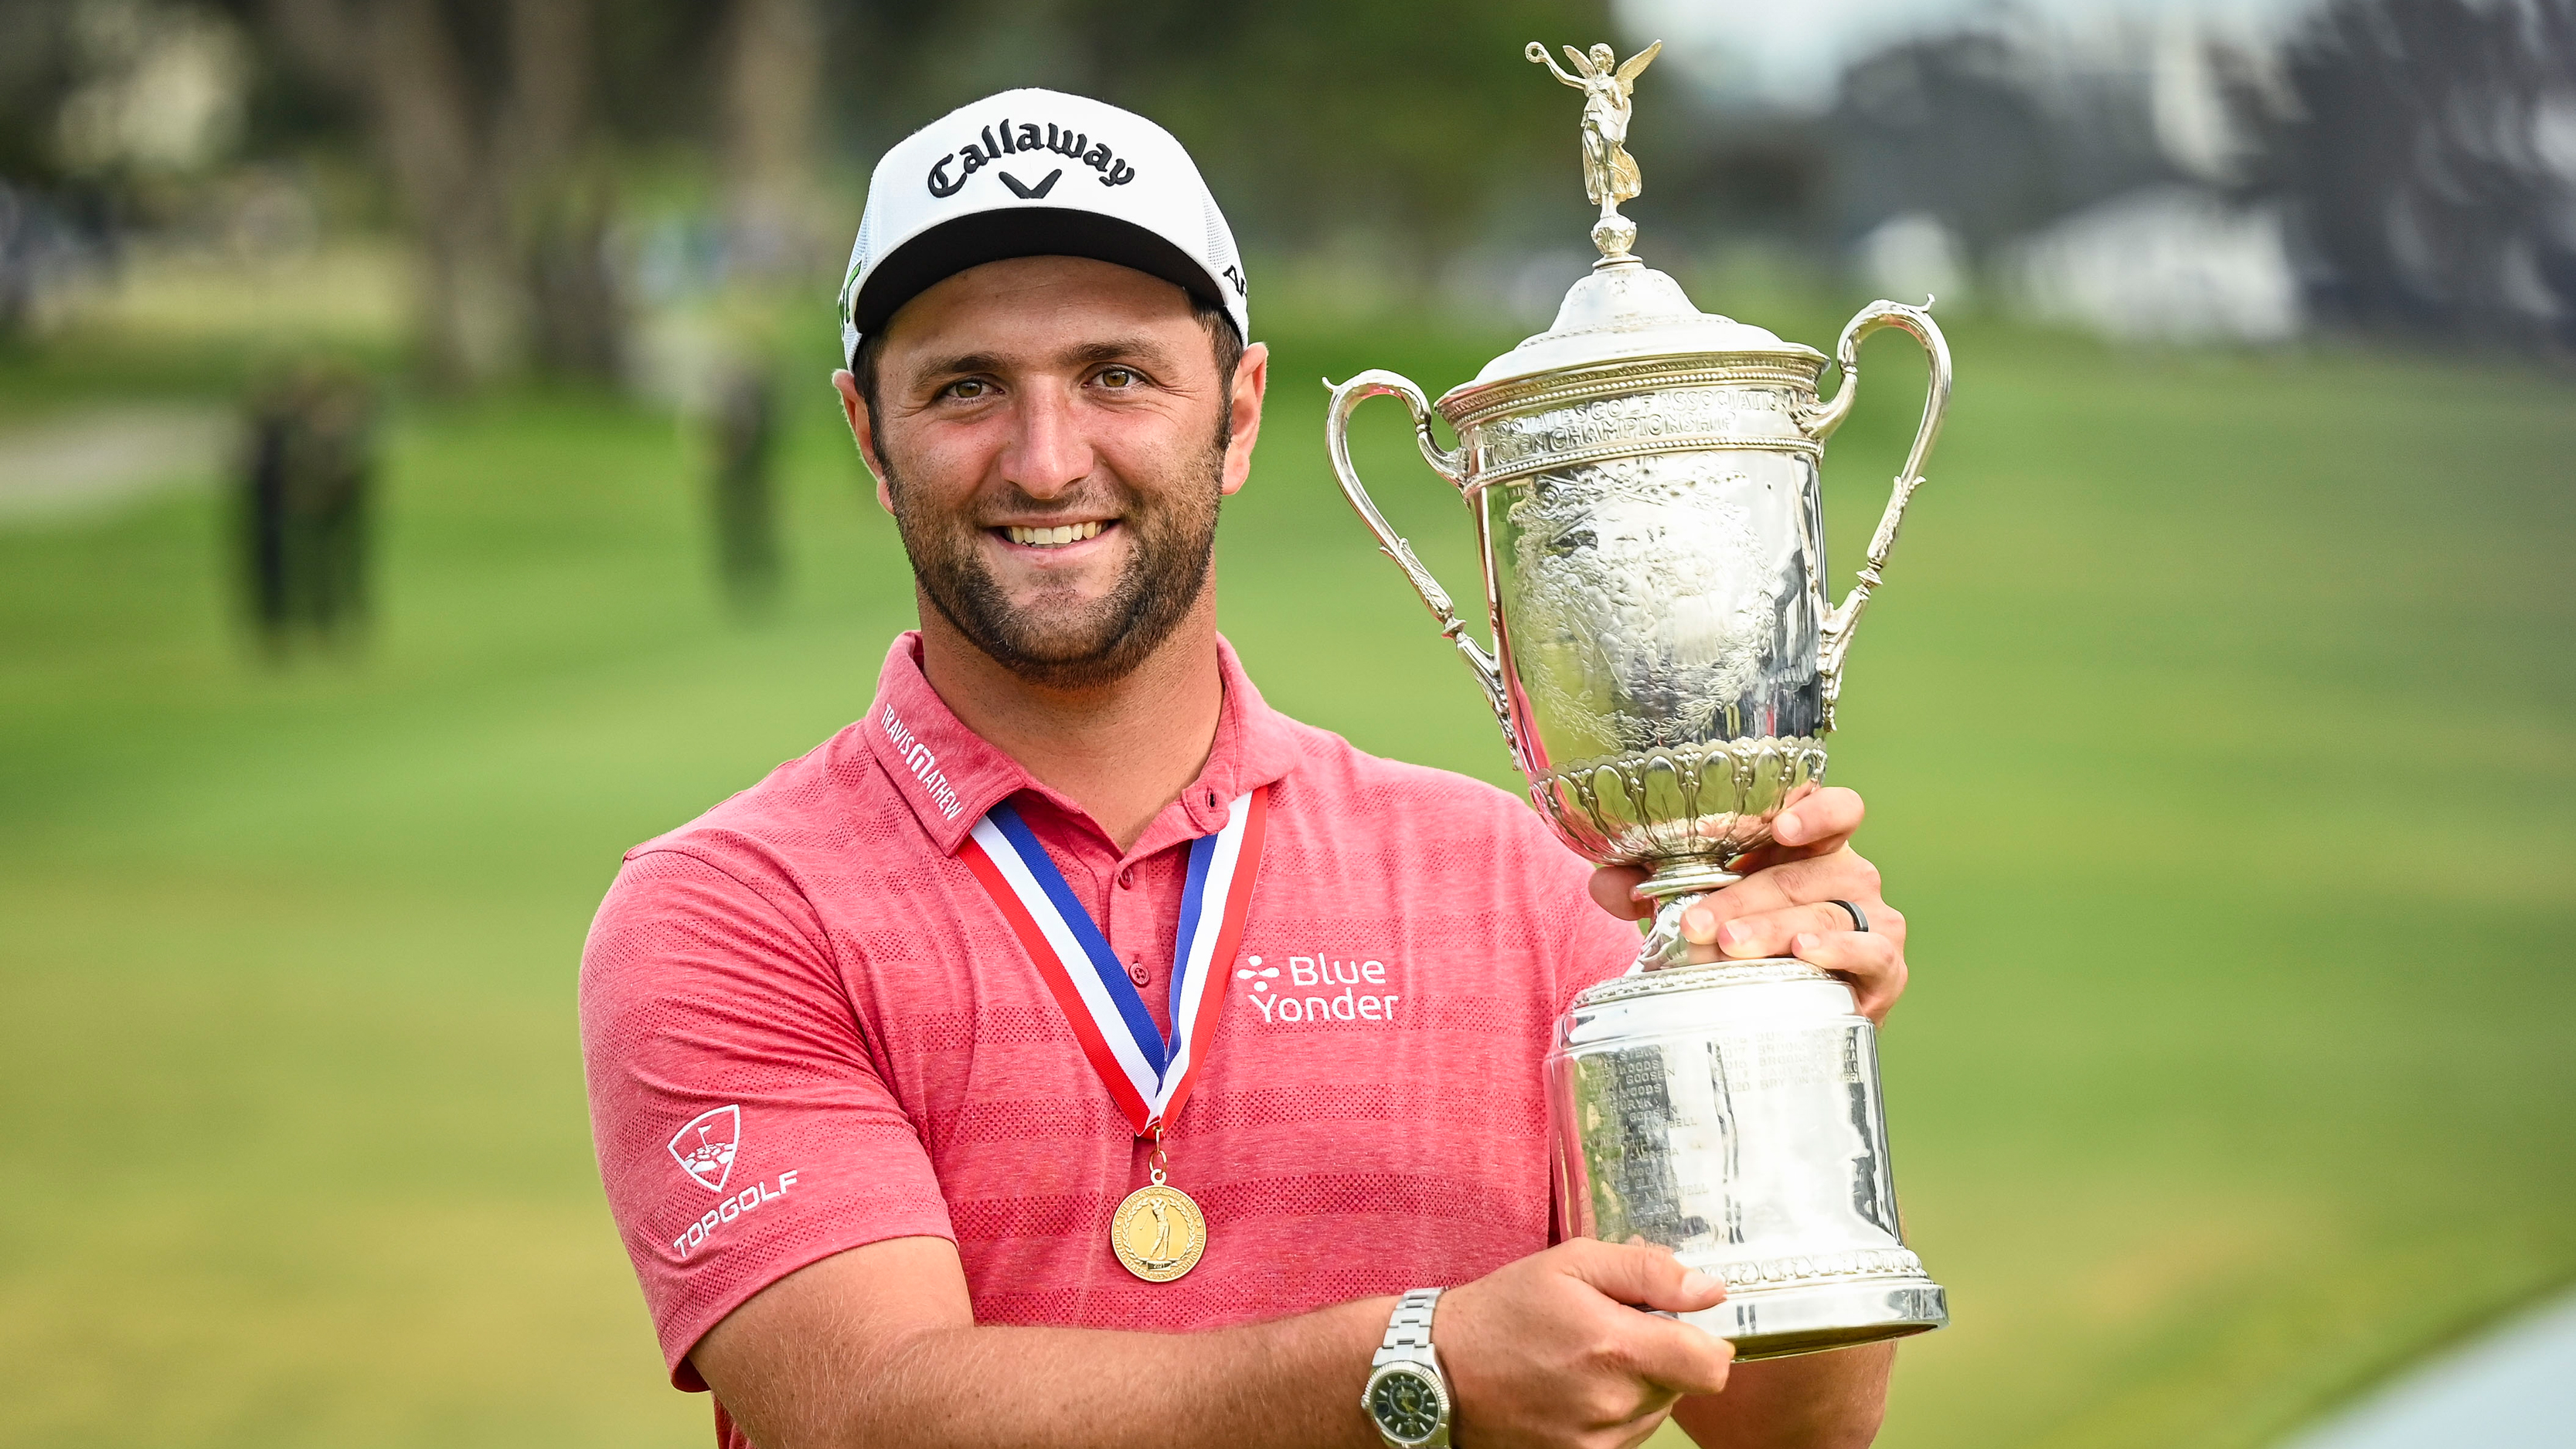 John Ram smiling after winning the 2021 US Open in Tory Pines